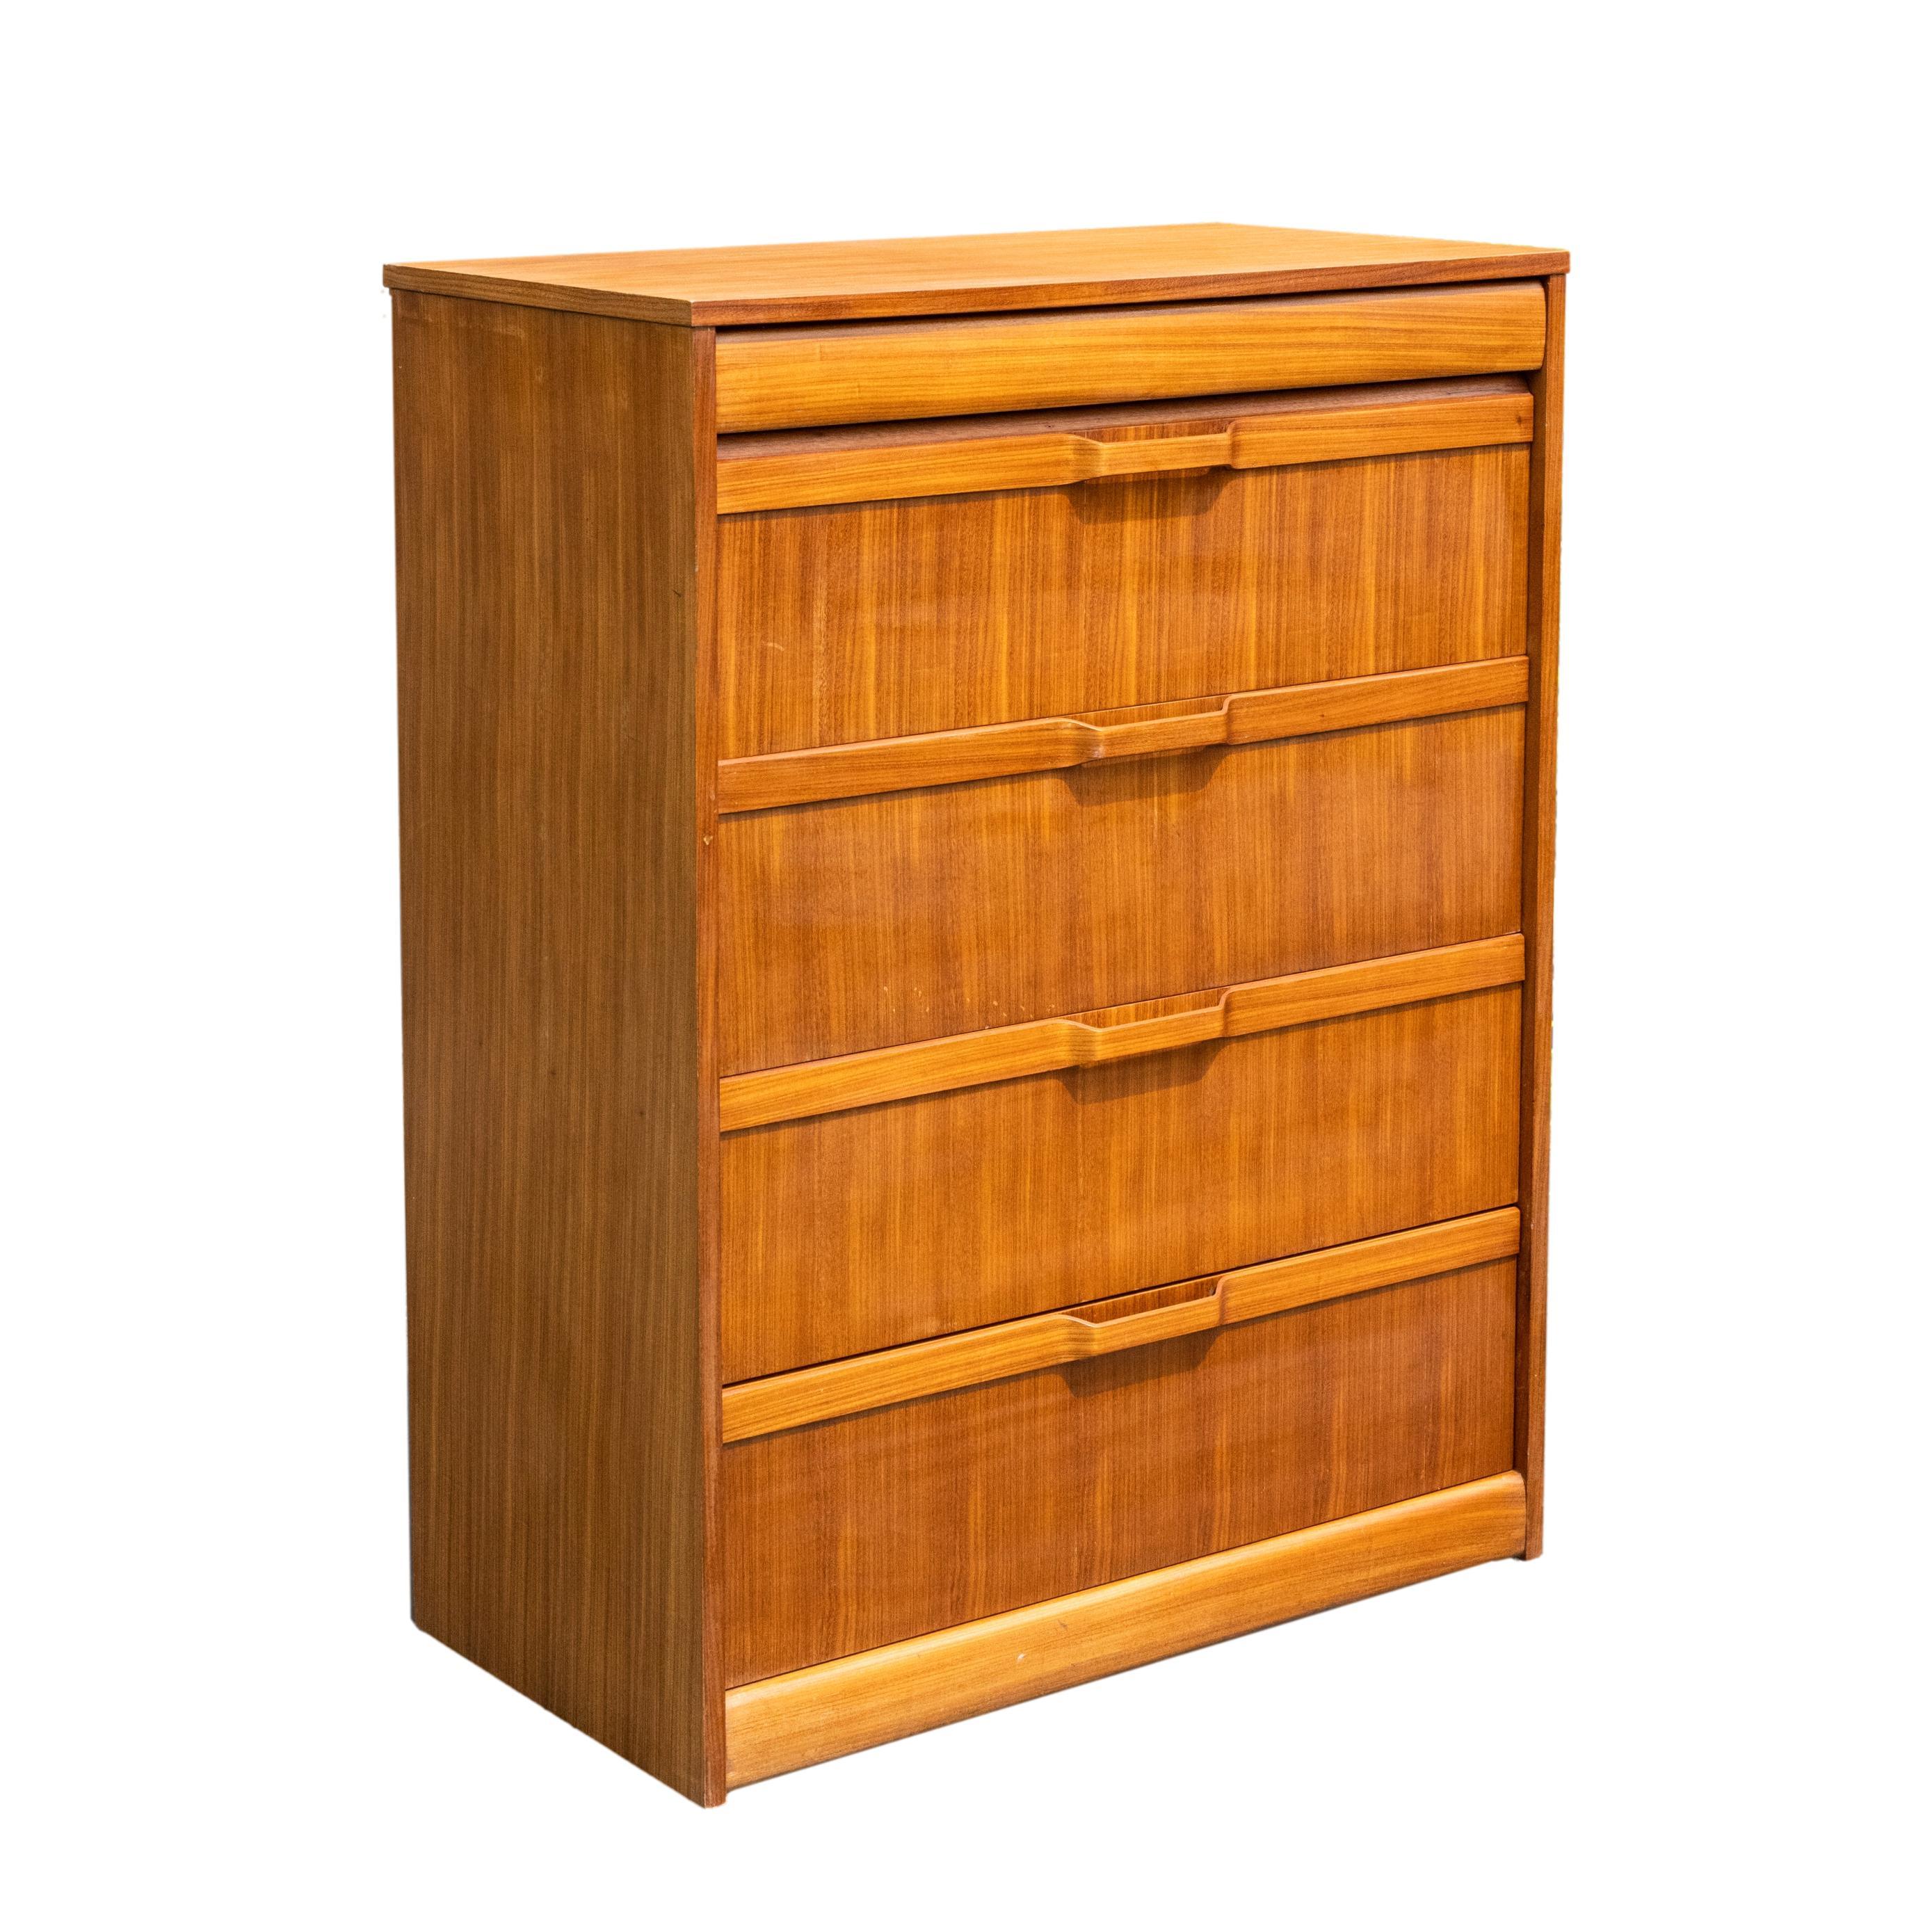 Mid-Century Modern teak and elm chest-of-drawers, the top with a 'hidden' frieze drawer in elm, above four large drawers, each with applied laminate bands with molded, open pulls in elm, on a conforming base, with illegible maker's stamp on the back